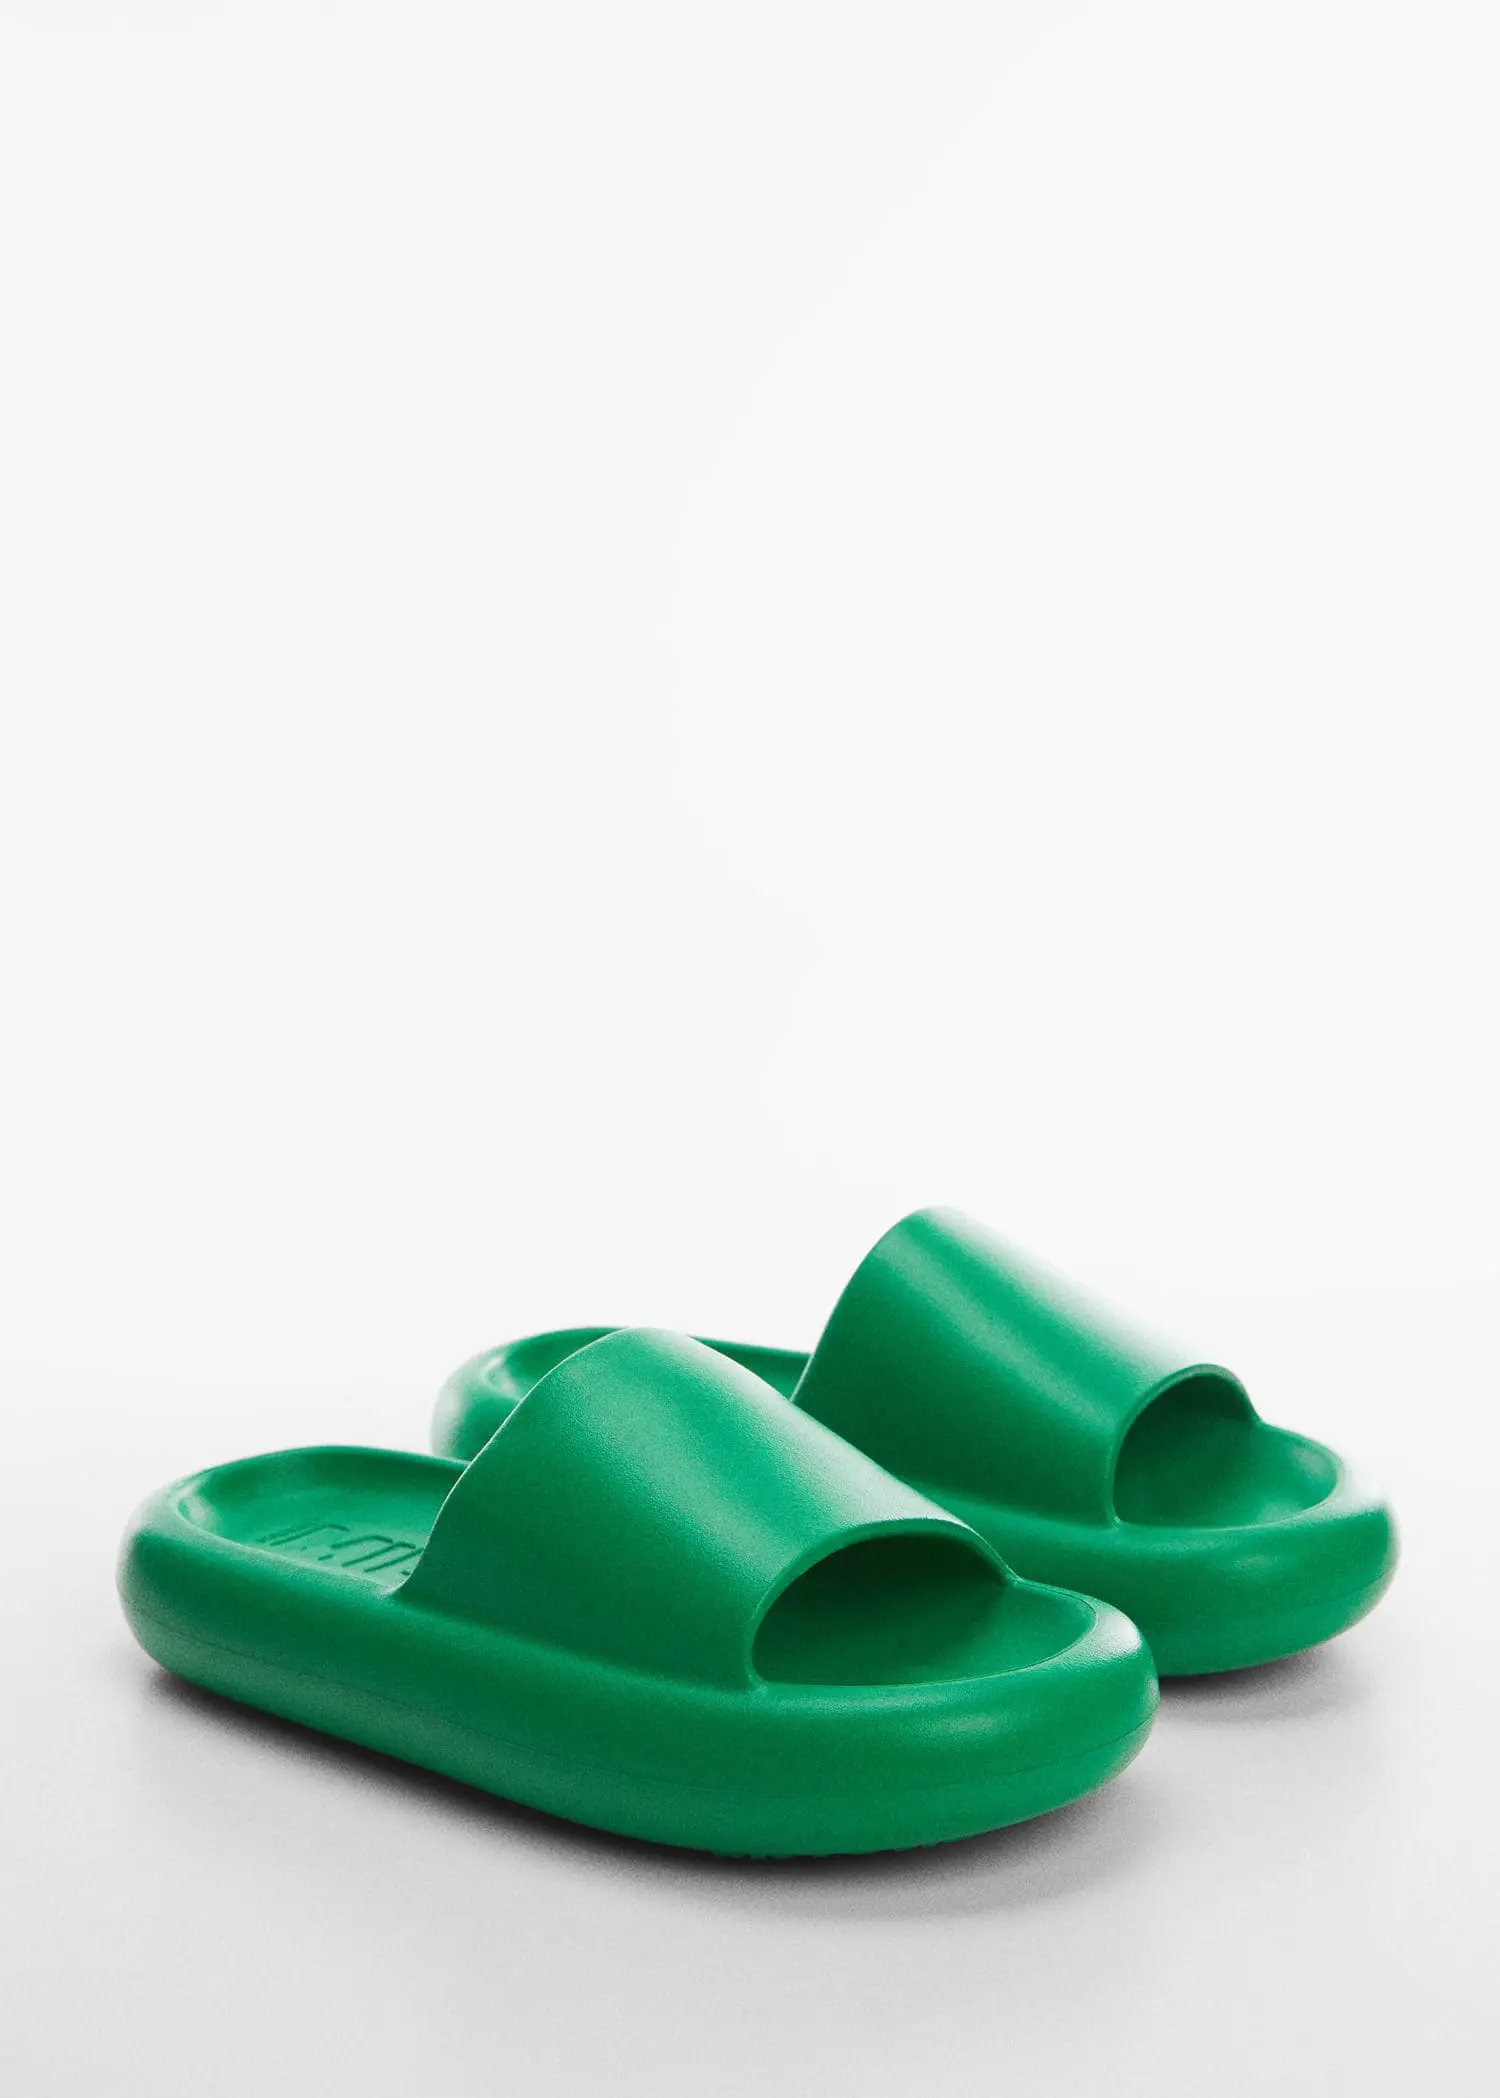 Mango Platform sandals. a pair of green sandals sitting on top of a table. 